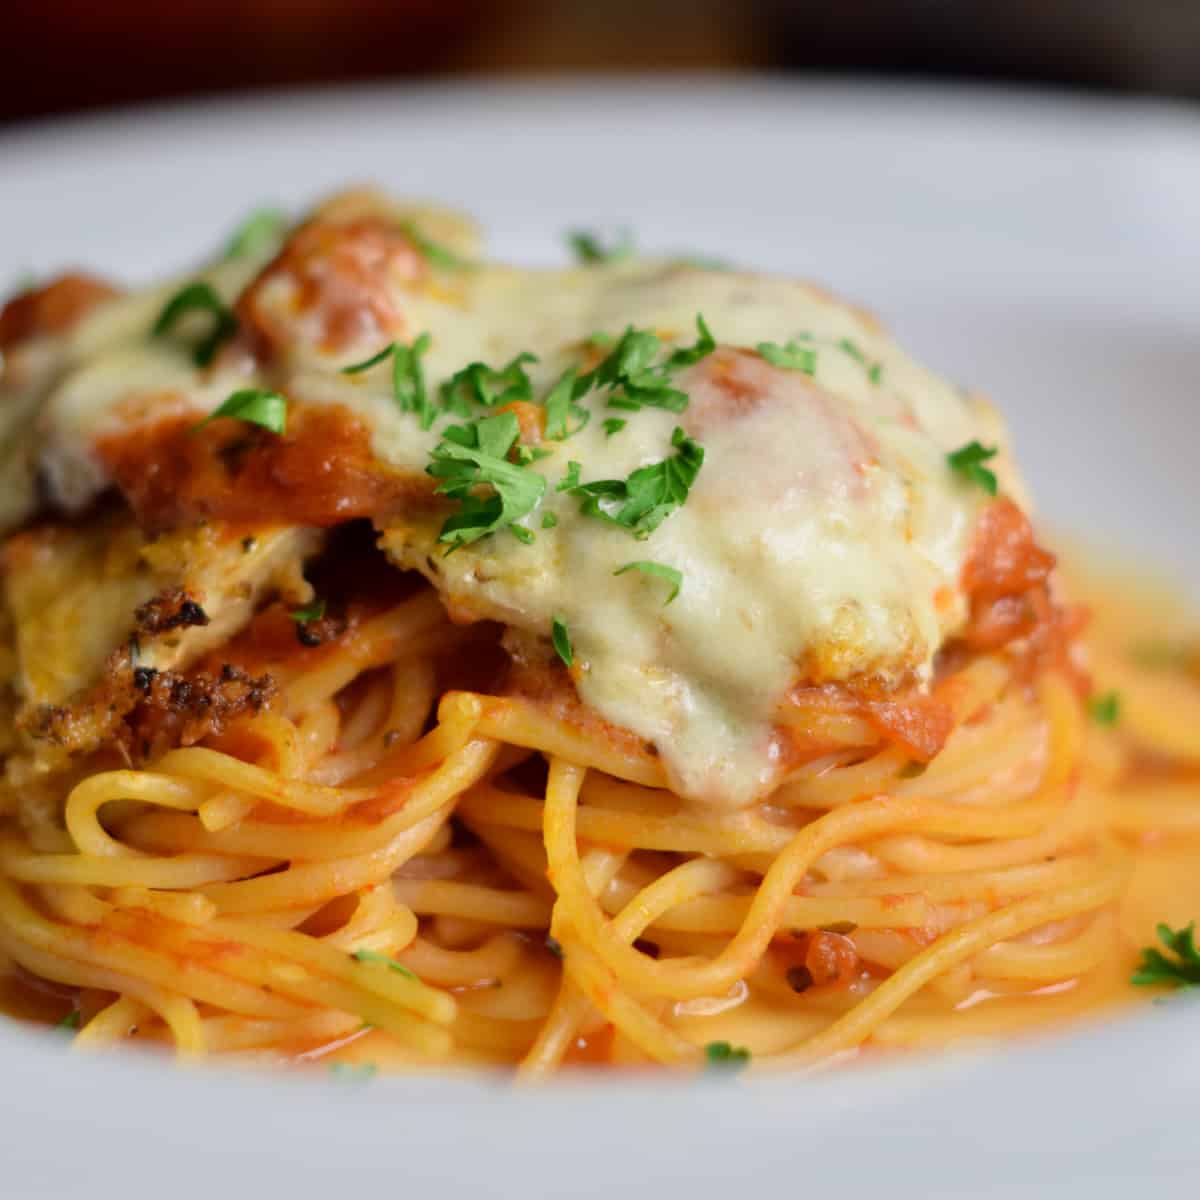 A plate of quick and easy homemade chicken parm.